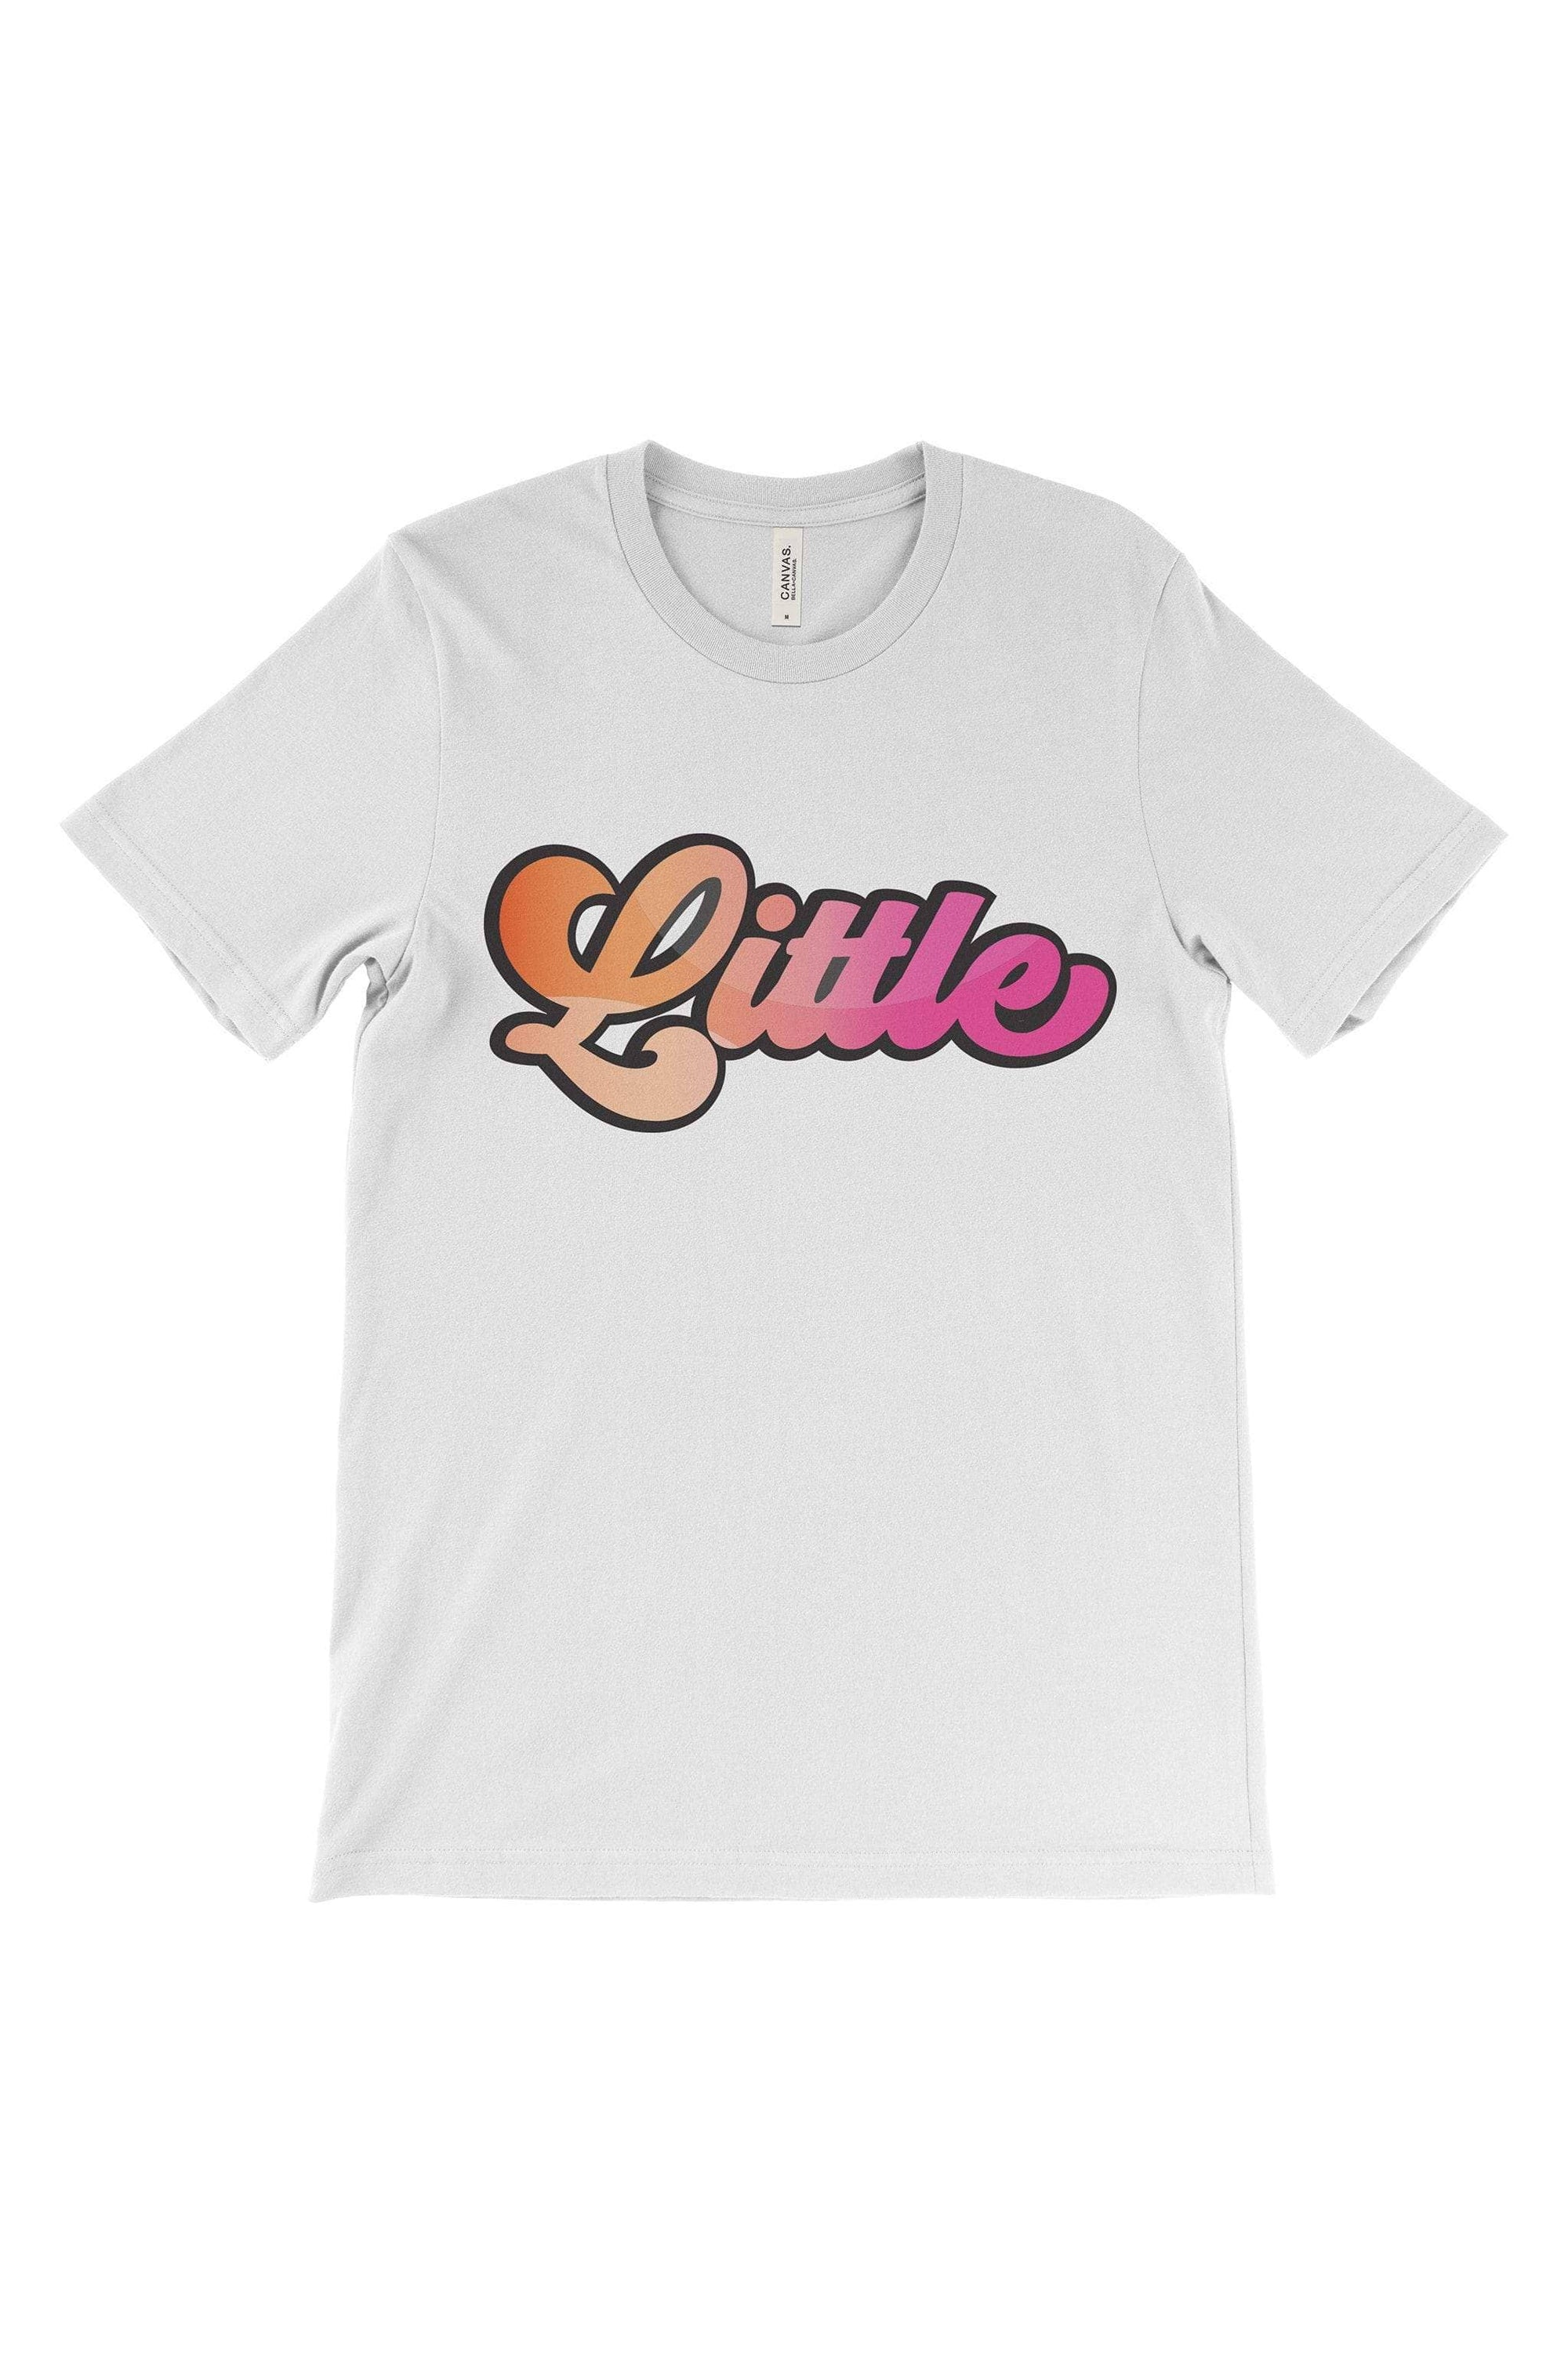 Flower Power Hippie Big Little Bella Canvas Short Sleeve Unisex Tee, Ladies, Sunny and Southern, - Sunny and Southern,